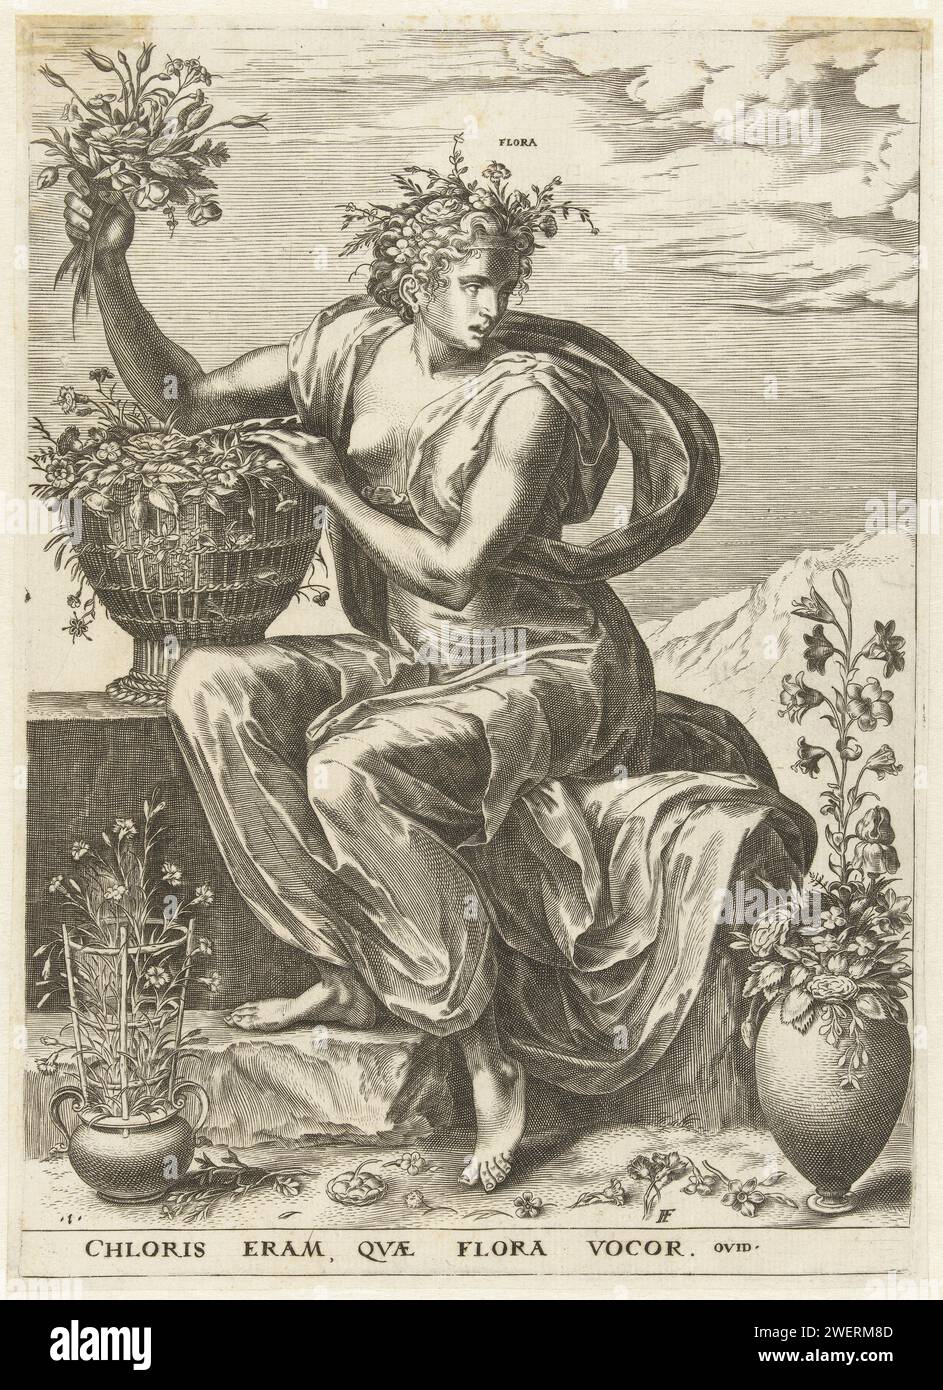 Flora, Cornelis Cort, after Frans Flower (1), 1564 print The goddess Flora sitting on a stone. There are baskets around her with flowers and her hair is also decorated with flowers.  paper engraving (story of) Flora Stock Photo